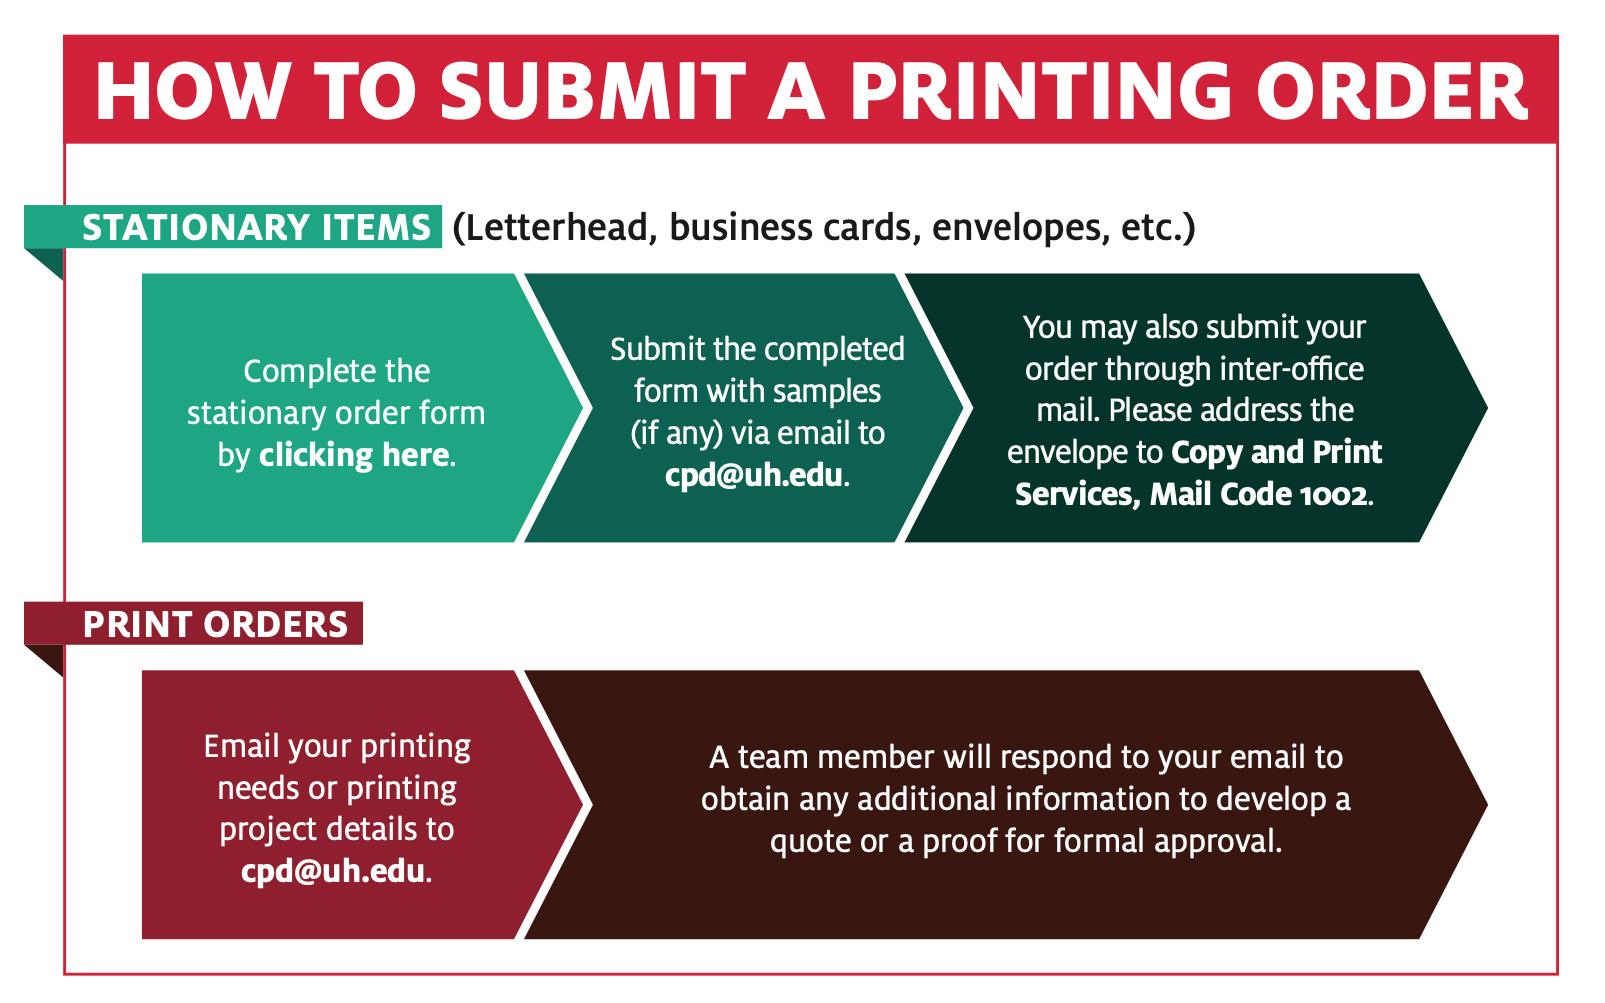 HOW TO SUBMIT A PRINTING ORDER